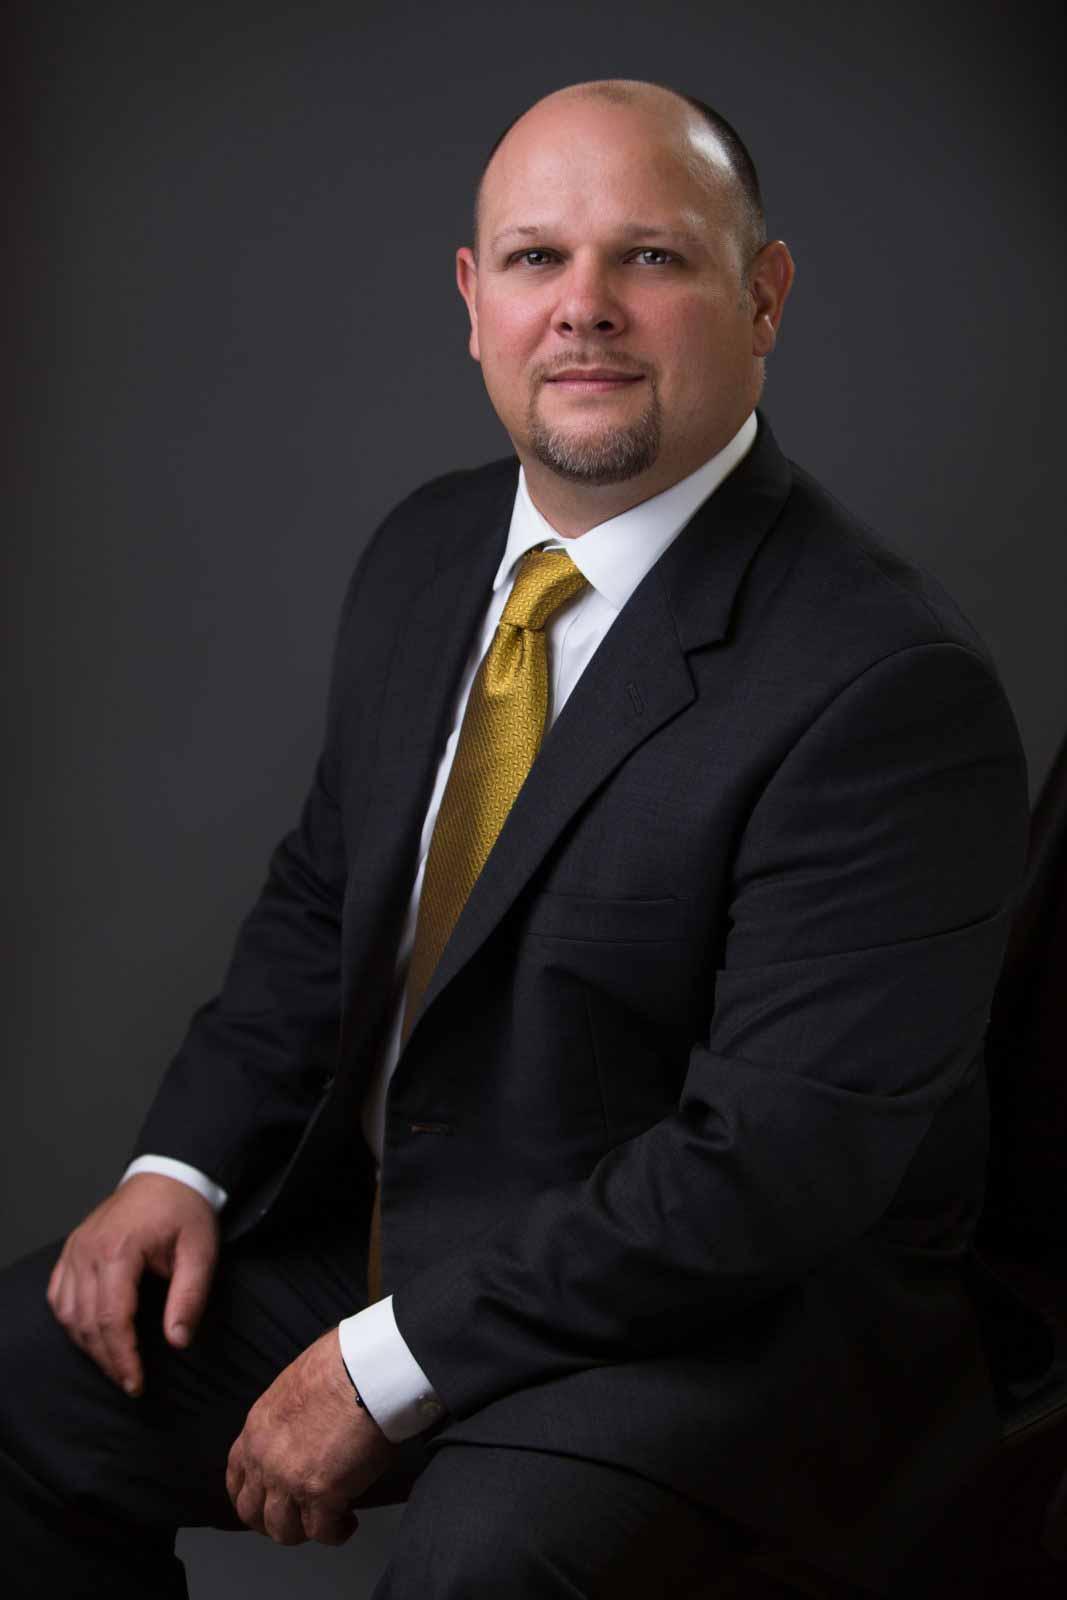 Image of Jerry Sorrells, Director of Operations for Quijano Law, The Immigration Attorneys in Atlanta, Georgia.